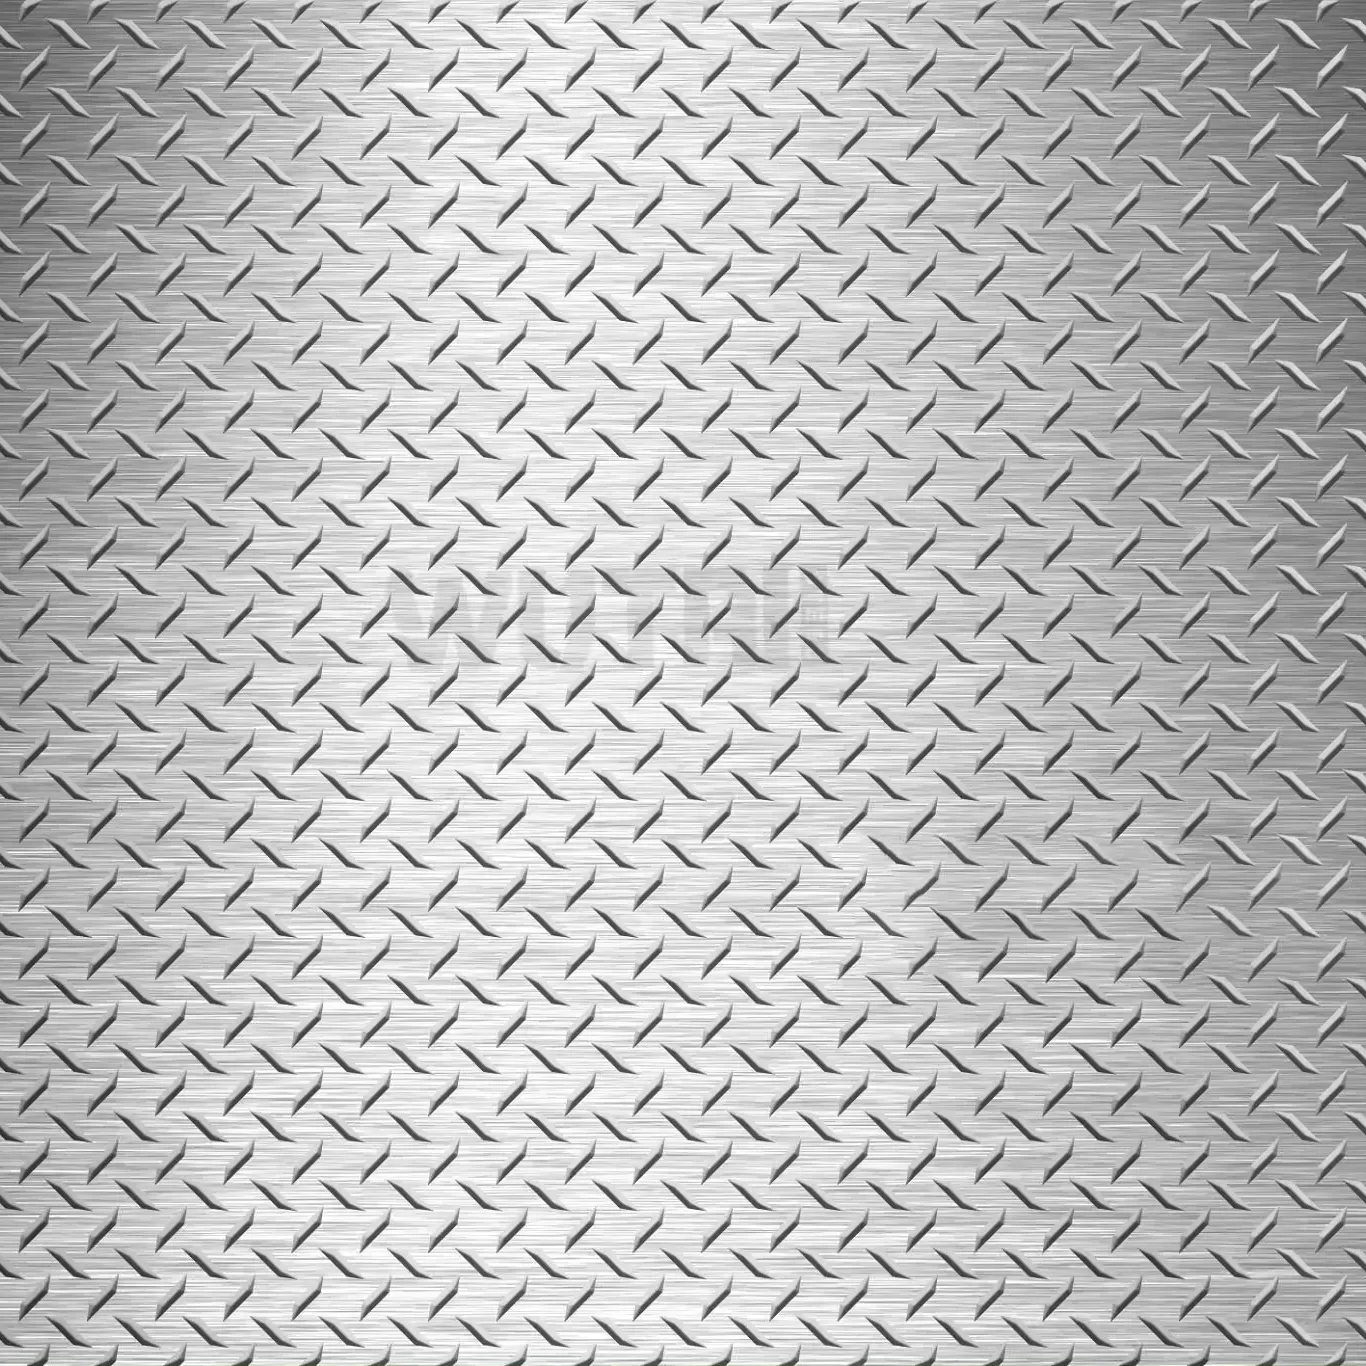 Chinese Supplier Stainless Steel Embossed Plate 201 304 304l 316l 321 310s 430 309s SS Pattern Stainless Steel Sheet